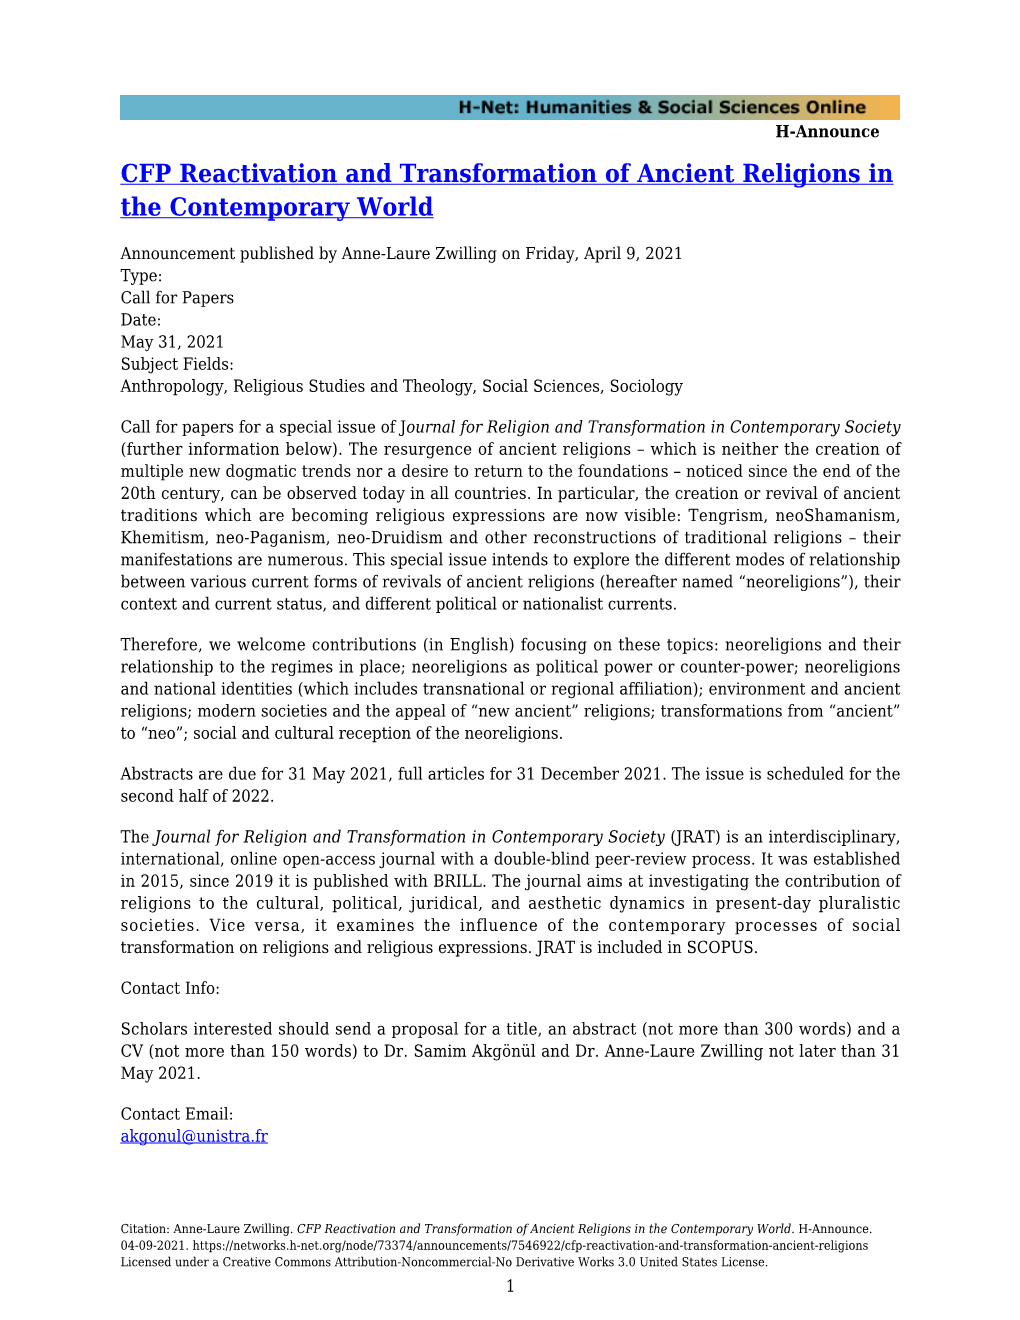 CFP Reactivation and Transformation of Ancient Religions in the Contemporary World